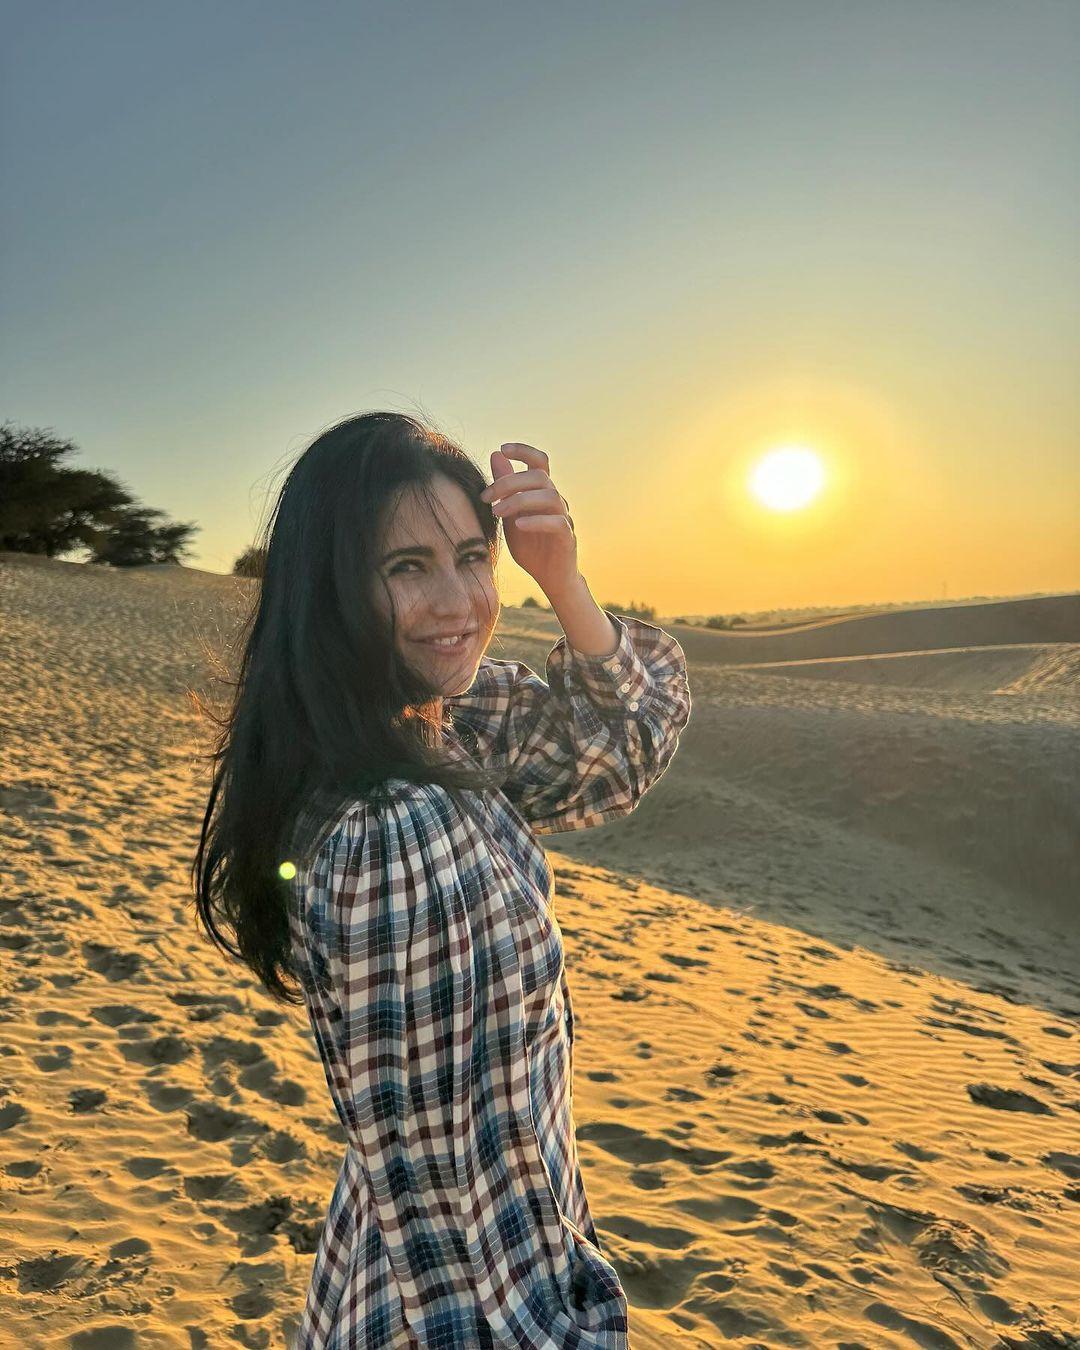 In this picture, Katrina wears a stunning checkered dress and poses in front of the setting sun in the desert